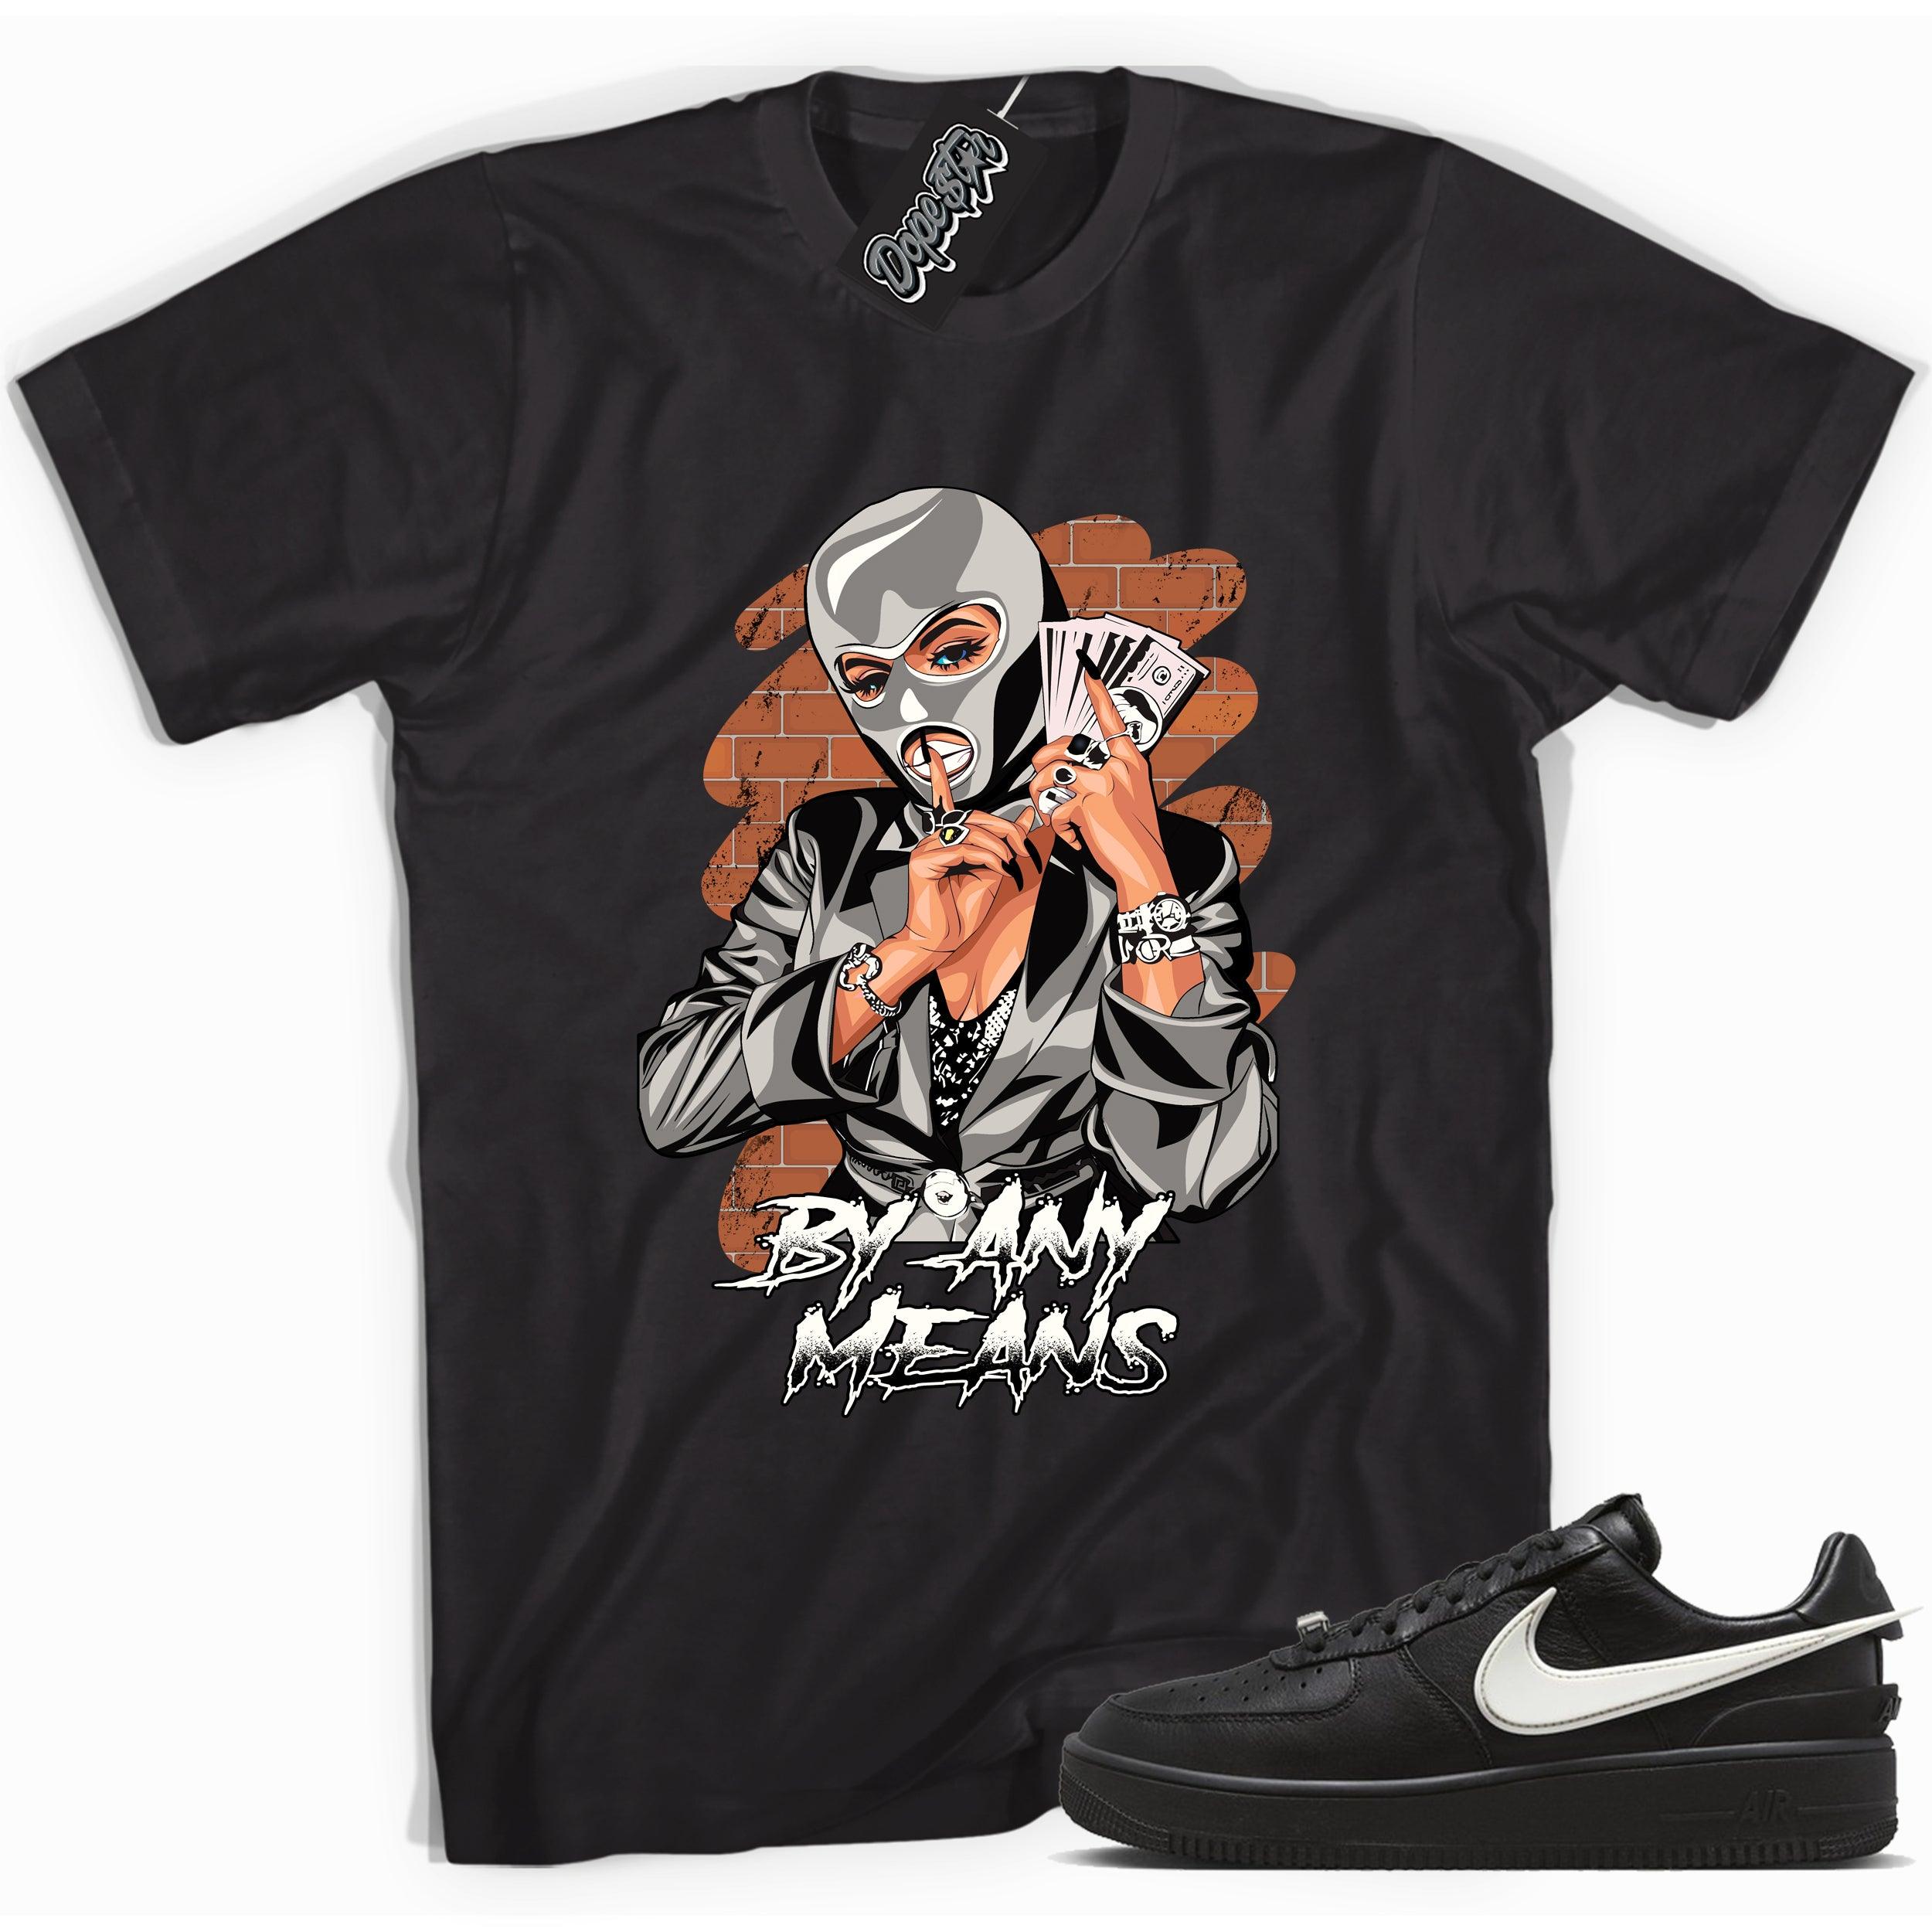 Cool black graphic tee with 'by any means' print, that perfectly matches Nike Air Force 1 Low Ambush Phantom Black sneakers